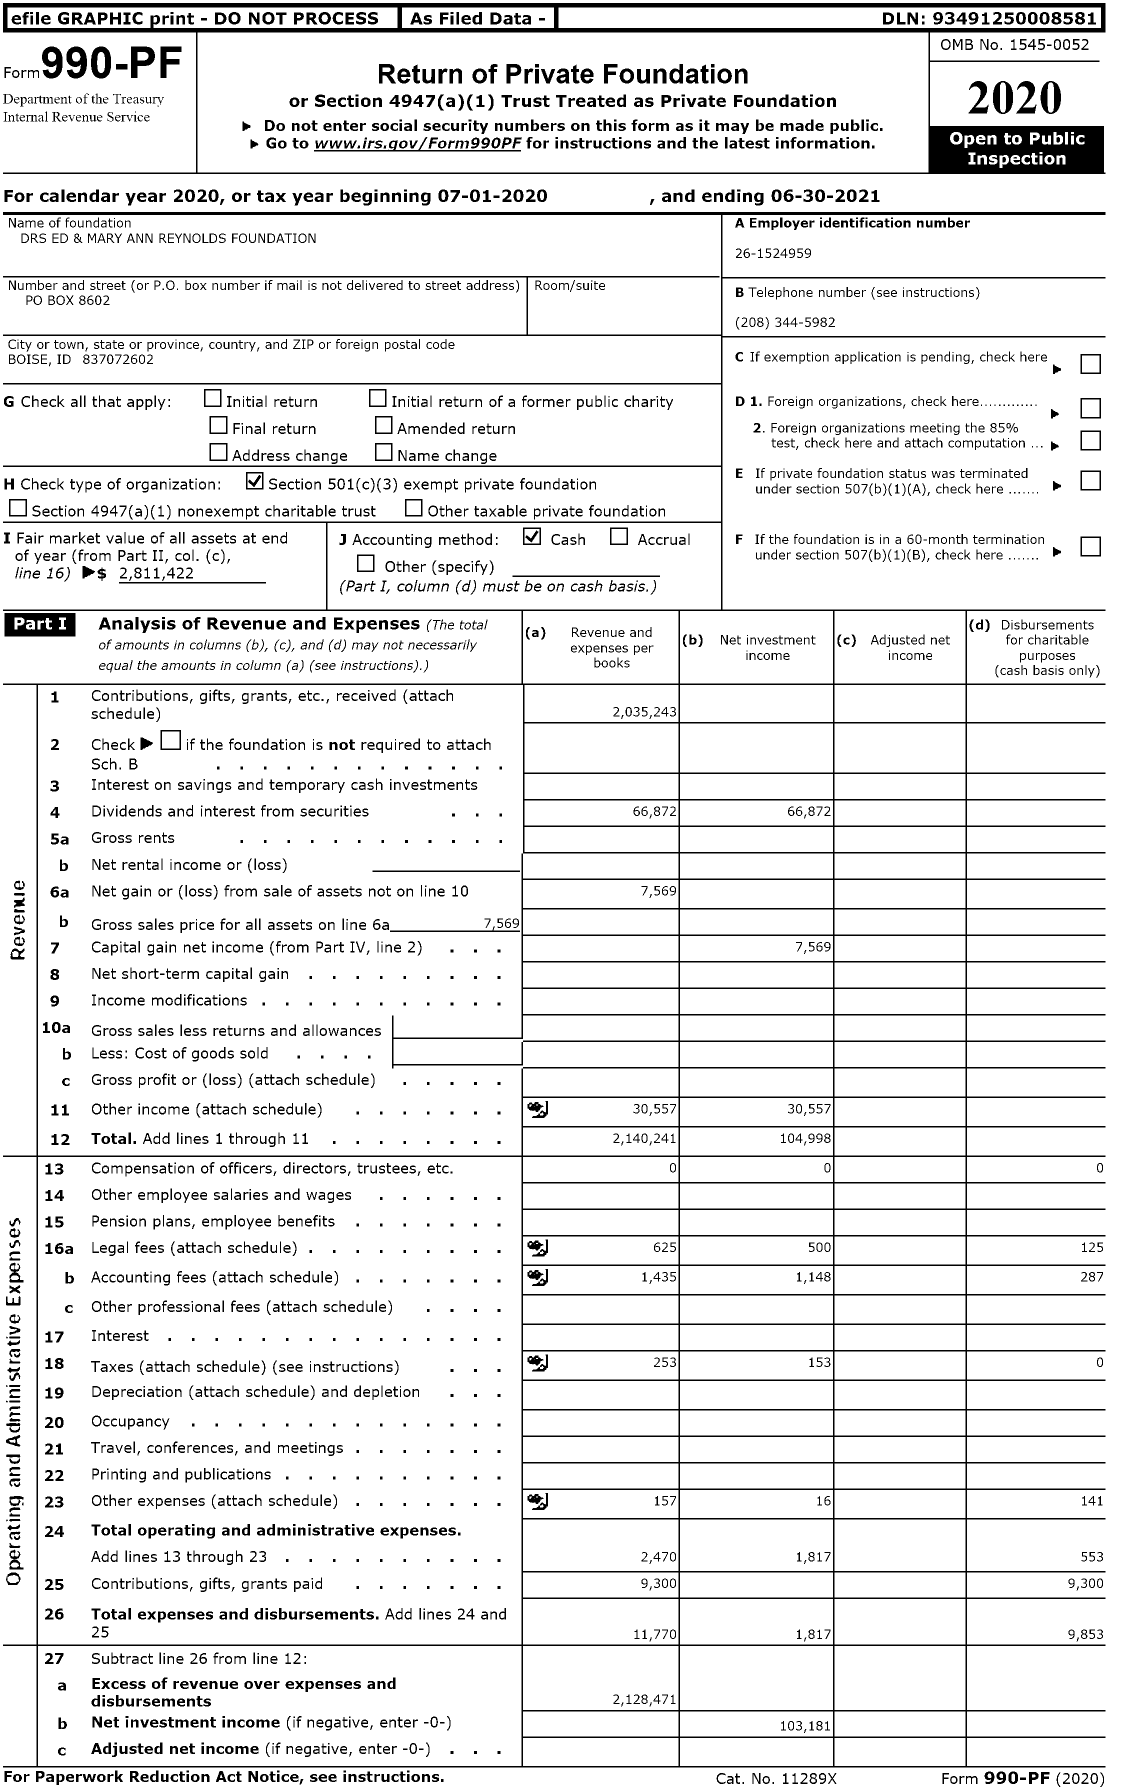 Image of first page of 2020 Form 990PF for DRS Ed and Mary Ann Reynolds Foundation